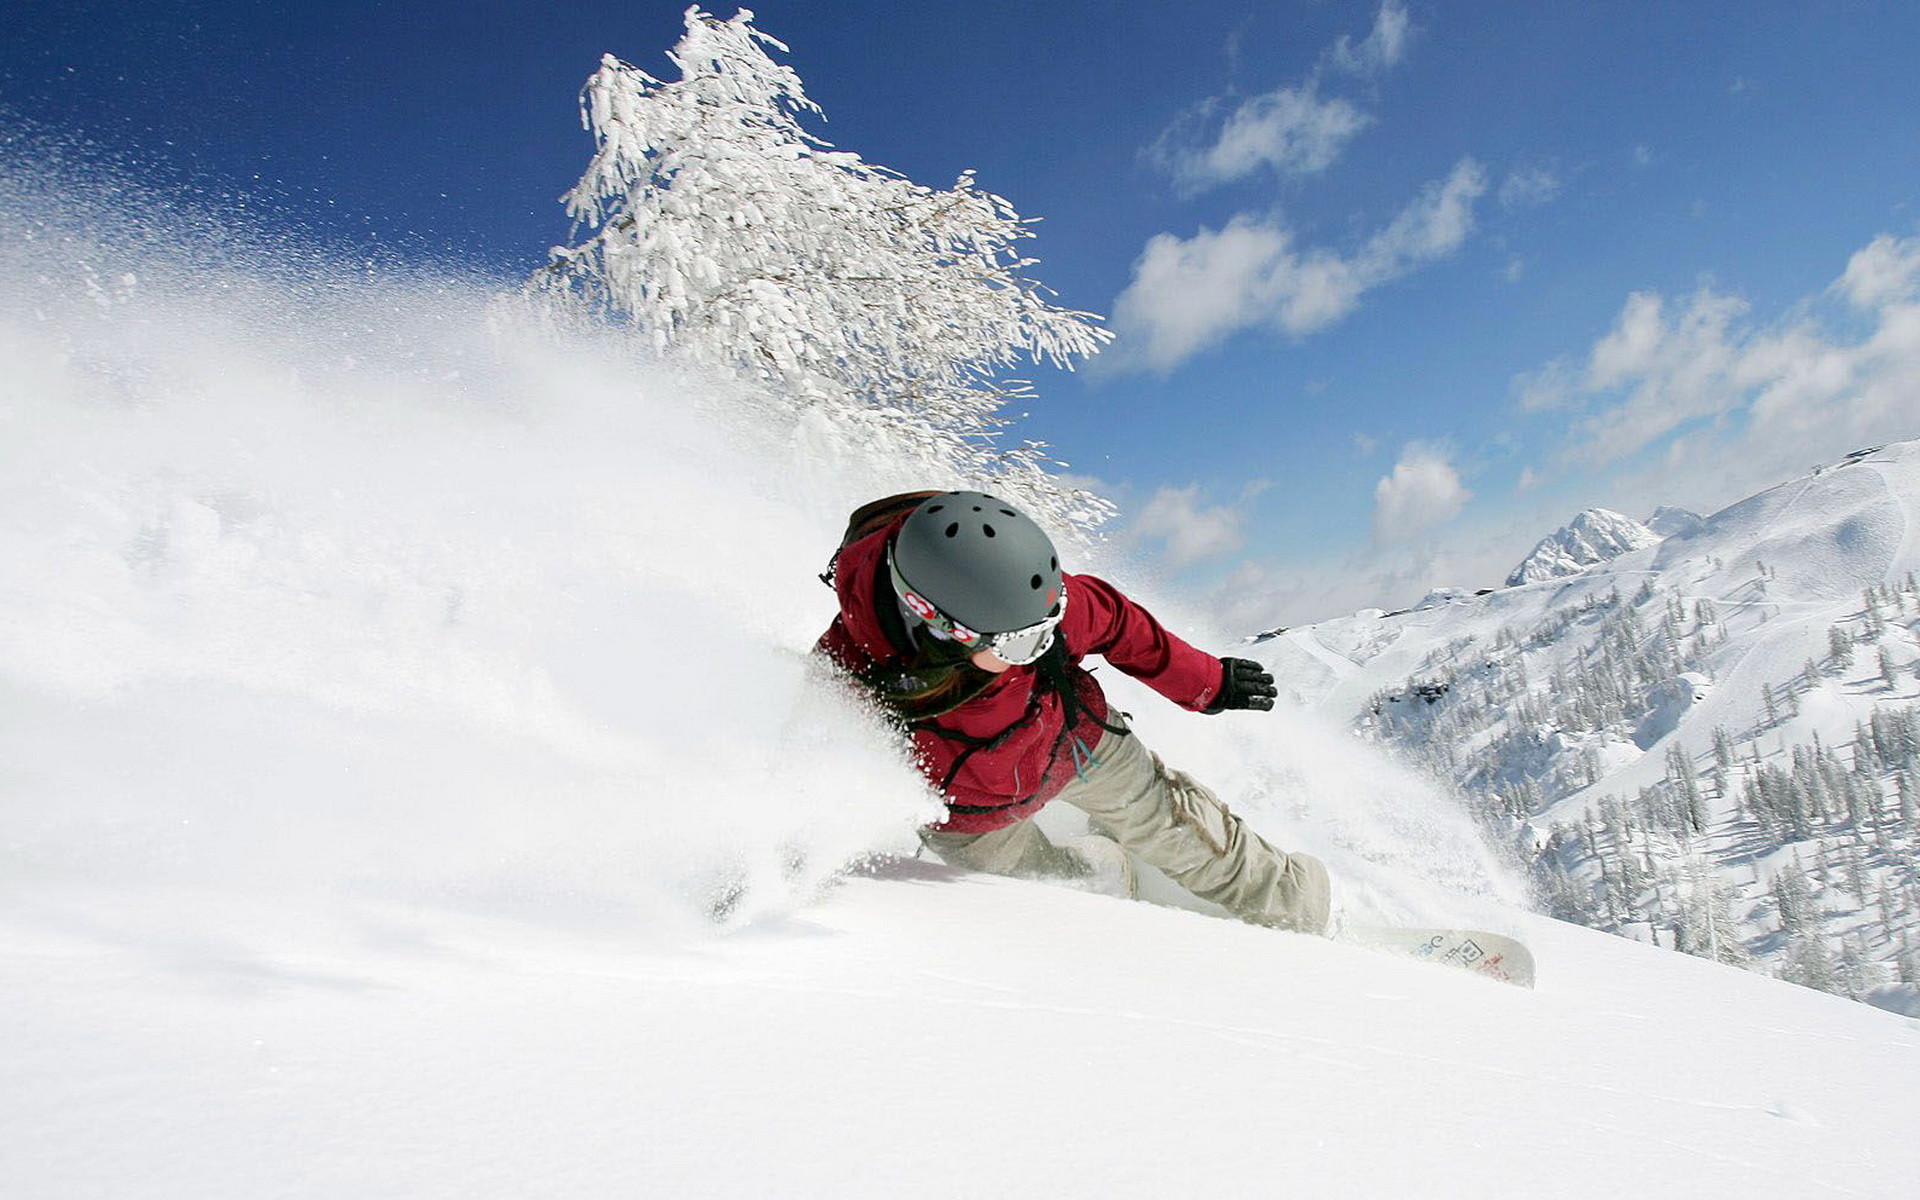 1920x1200 HQ RES Wallpapers of Snowboarding Hd - HD Wallpapers